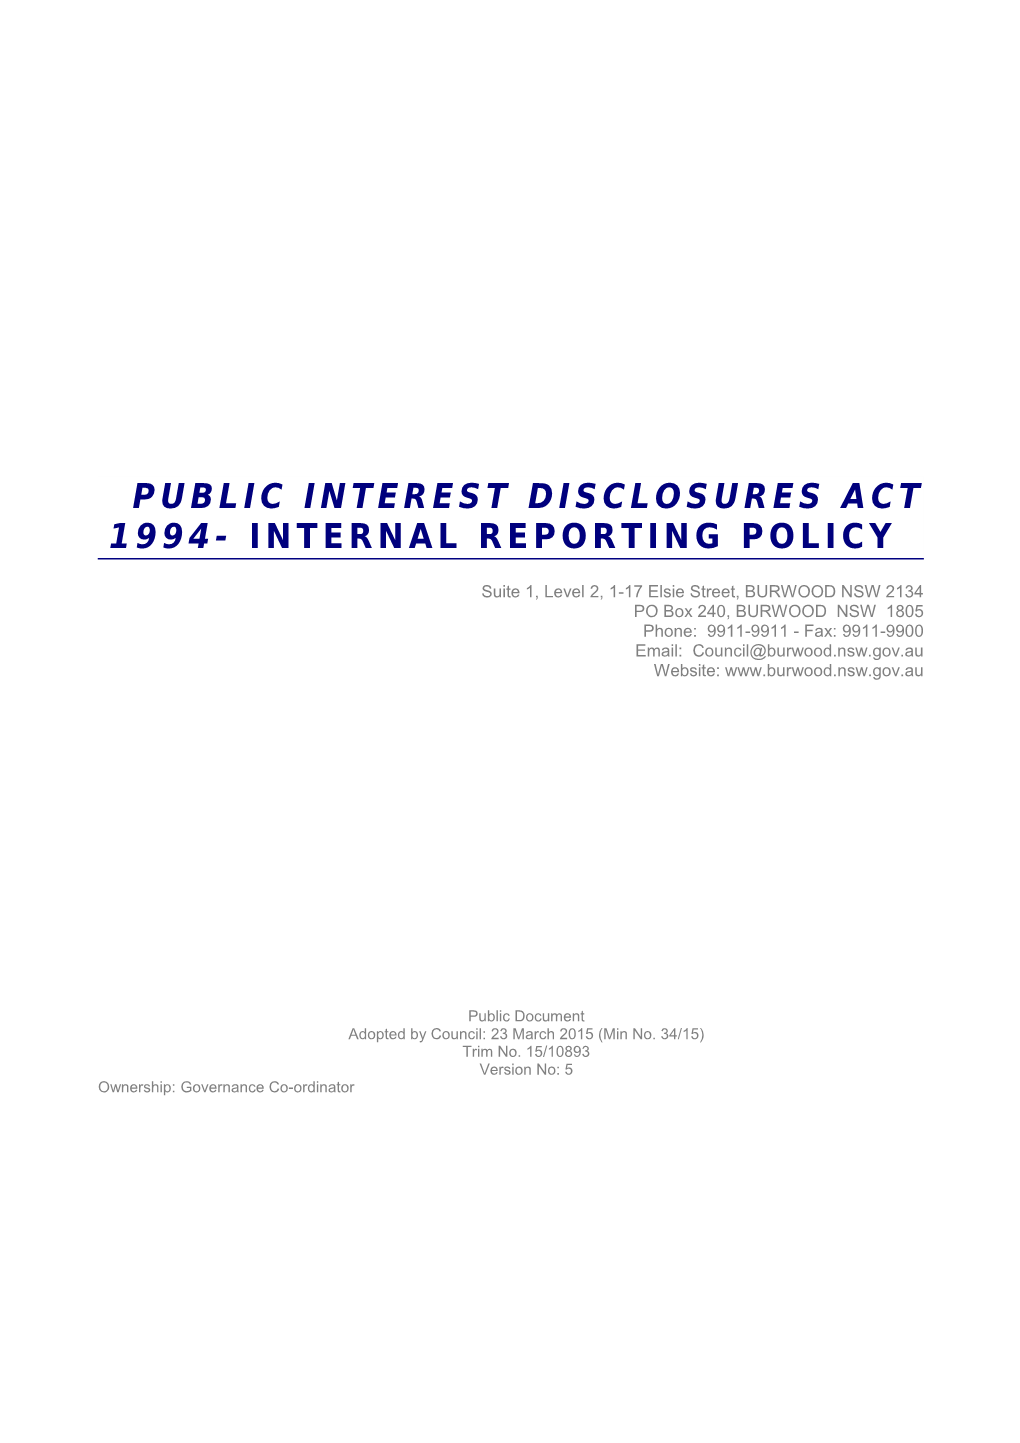 Public Interest Disclosures Act 1994- Internal Reporting Policy